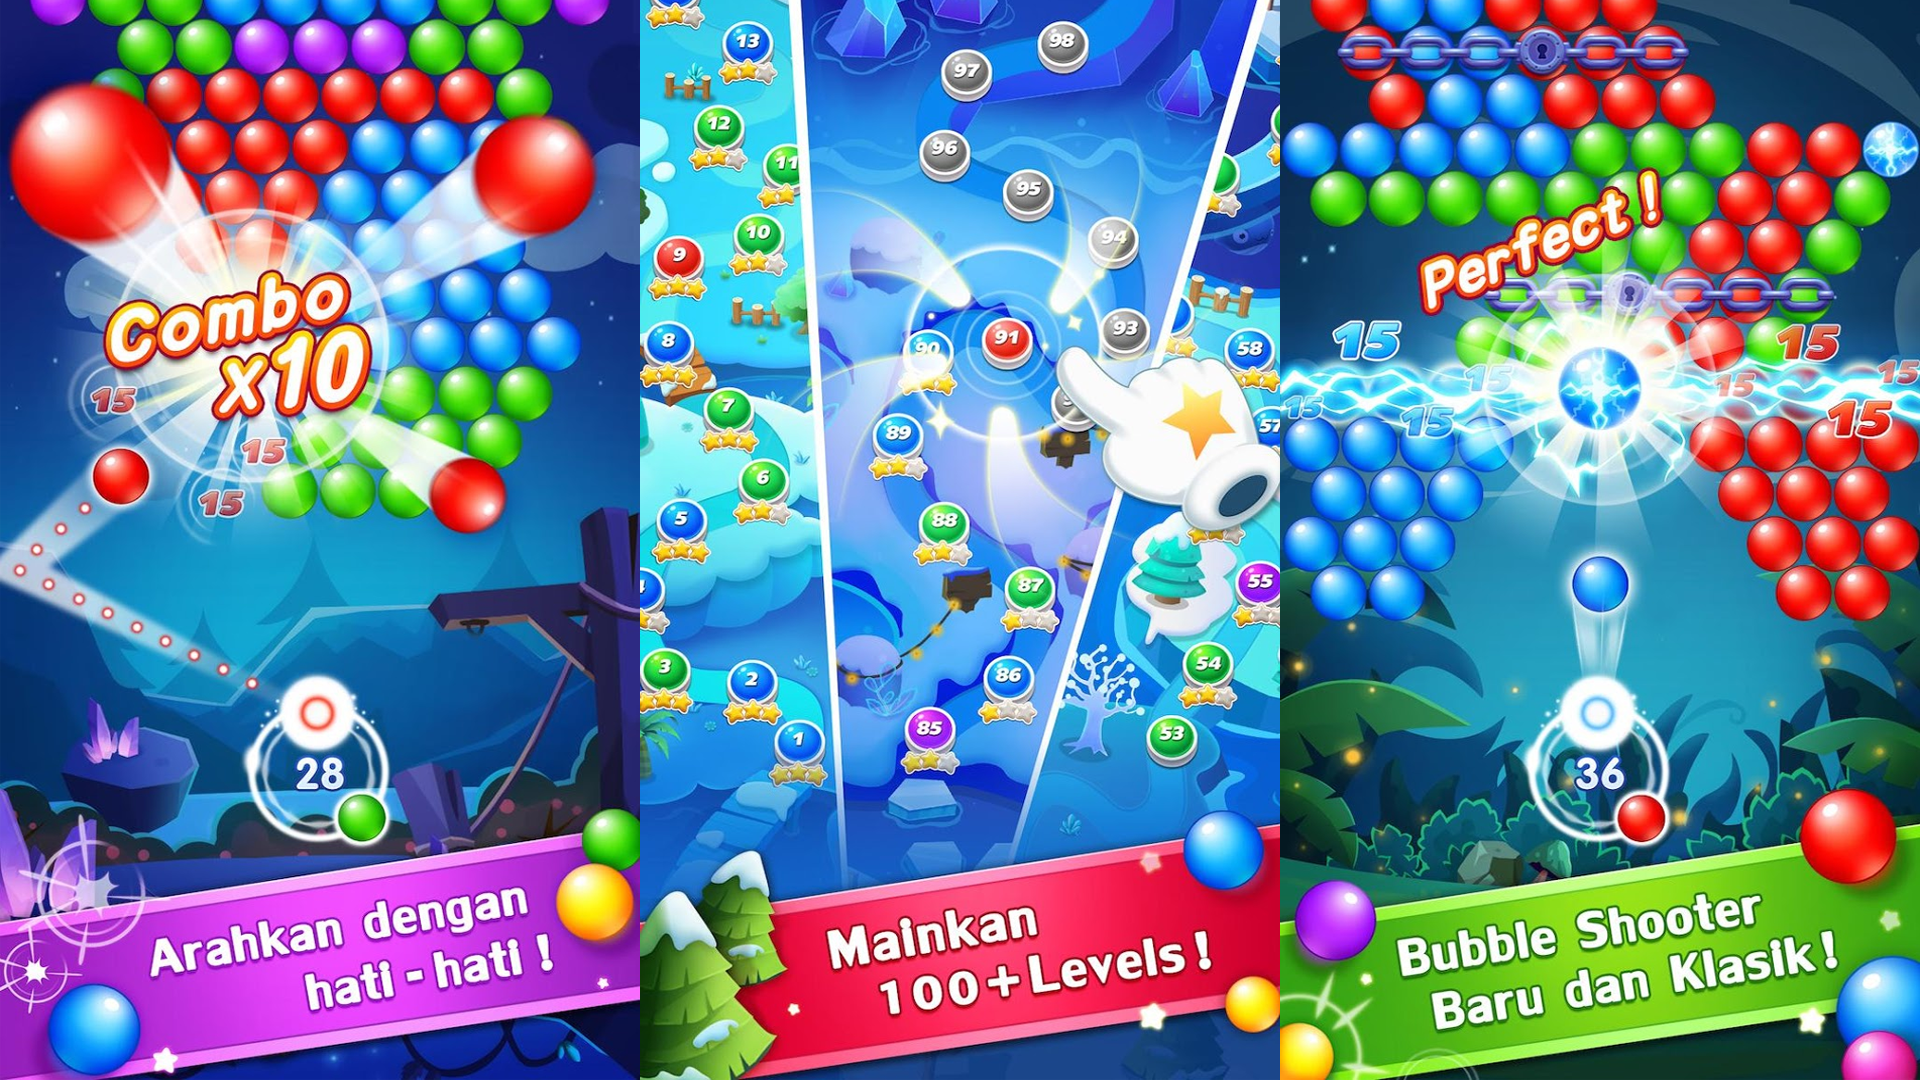 Bubble Genies - Apps on Google Play